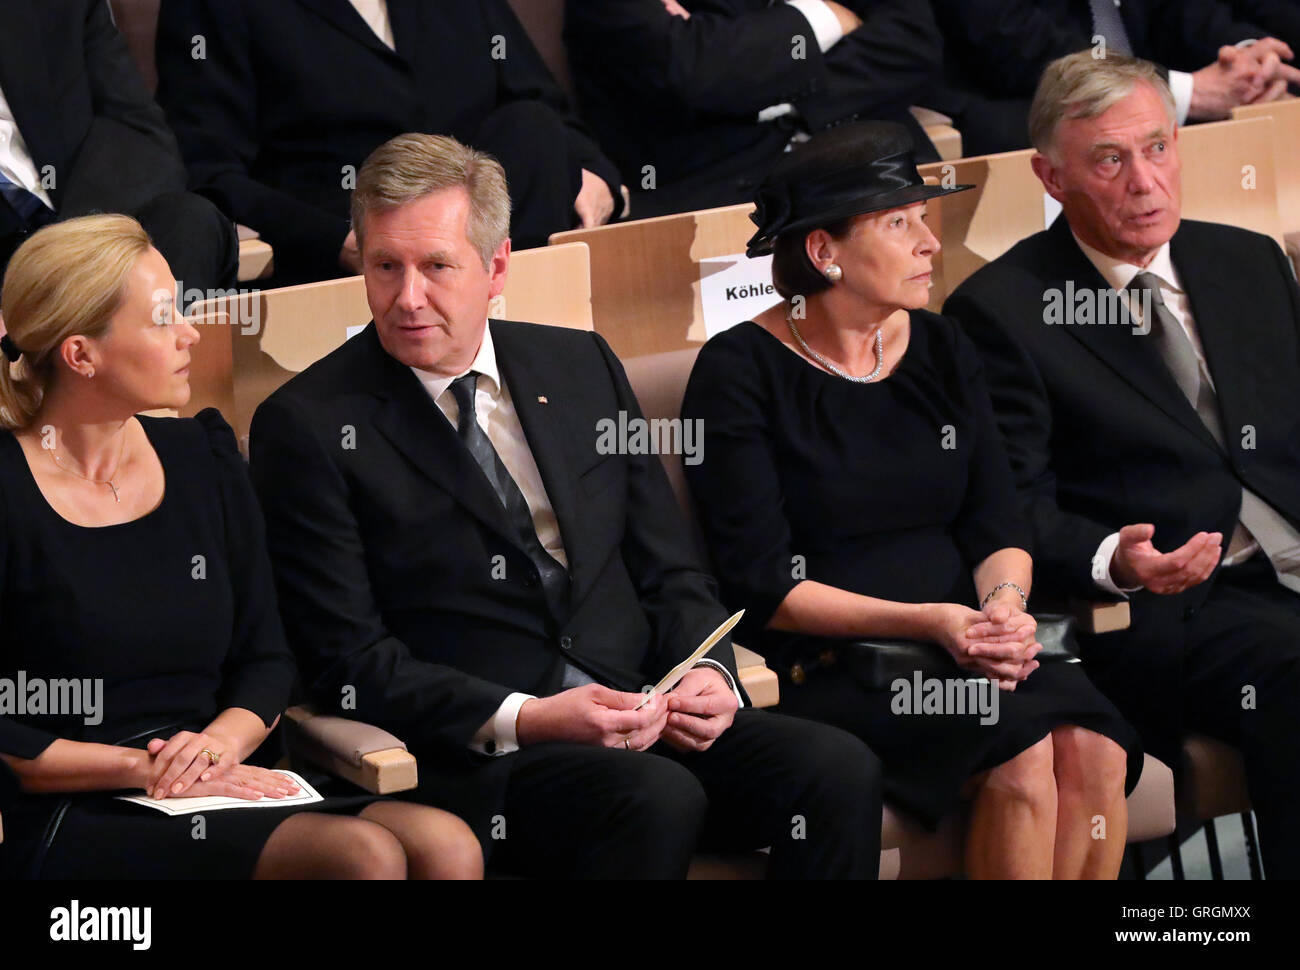 Berlin, Germany. 07th Sep, 2016. Former German Presidents Christian Wulff (2.f.L) and Horst Koehler and their wives Bettina Wulff (L) and Eva Luise have taken their seats at the act of state for former German President Walter Scheel in the Berlin Philharmonic in Berlin, Germany, 07 September 2016. Scheel died on 24 August 2016 at the age of 97. Photo: MICHAEL KAPPELER/POOL/dpa/Alamy Live News Stock Photo